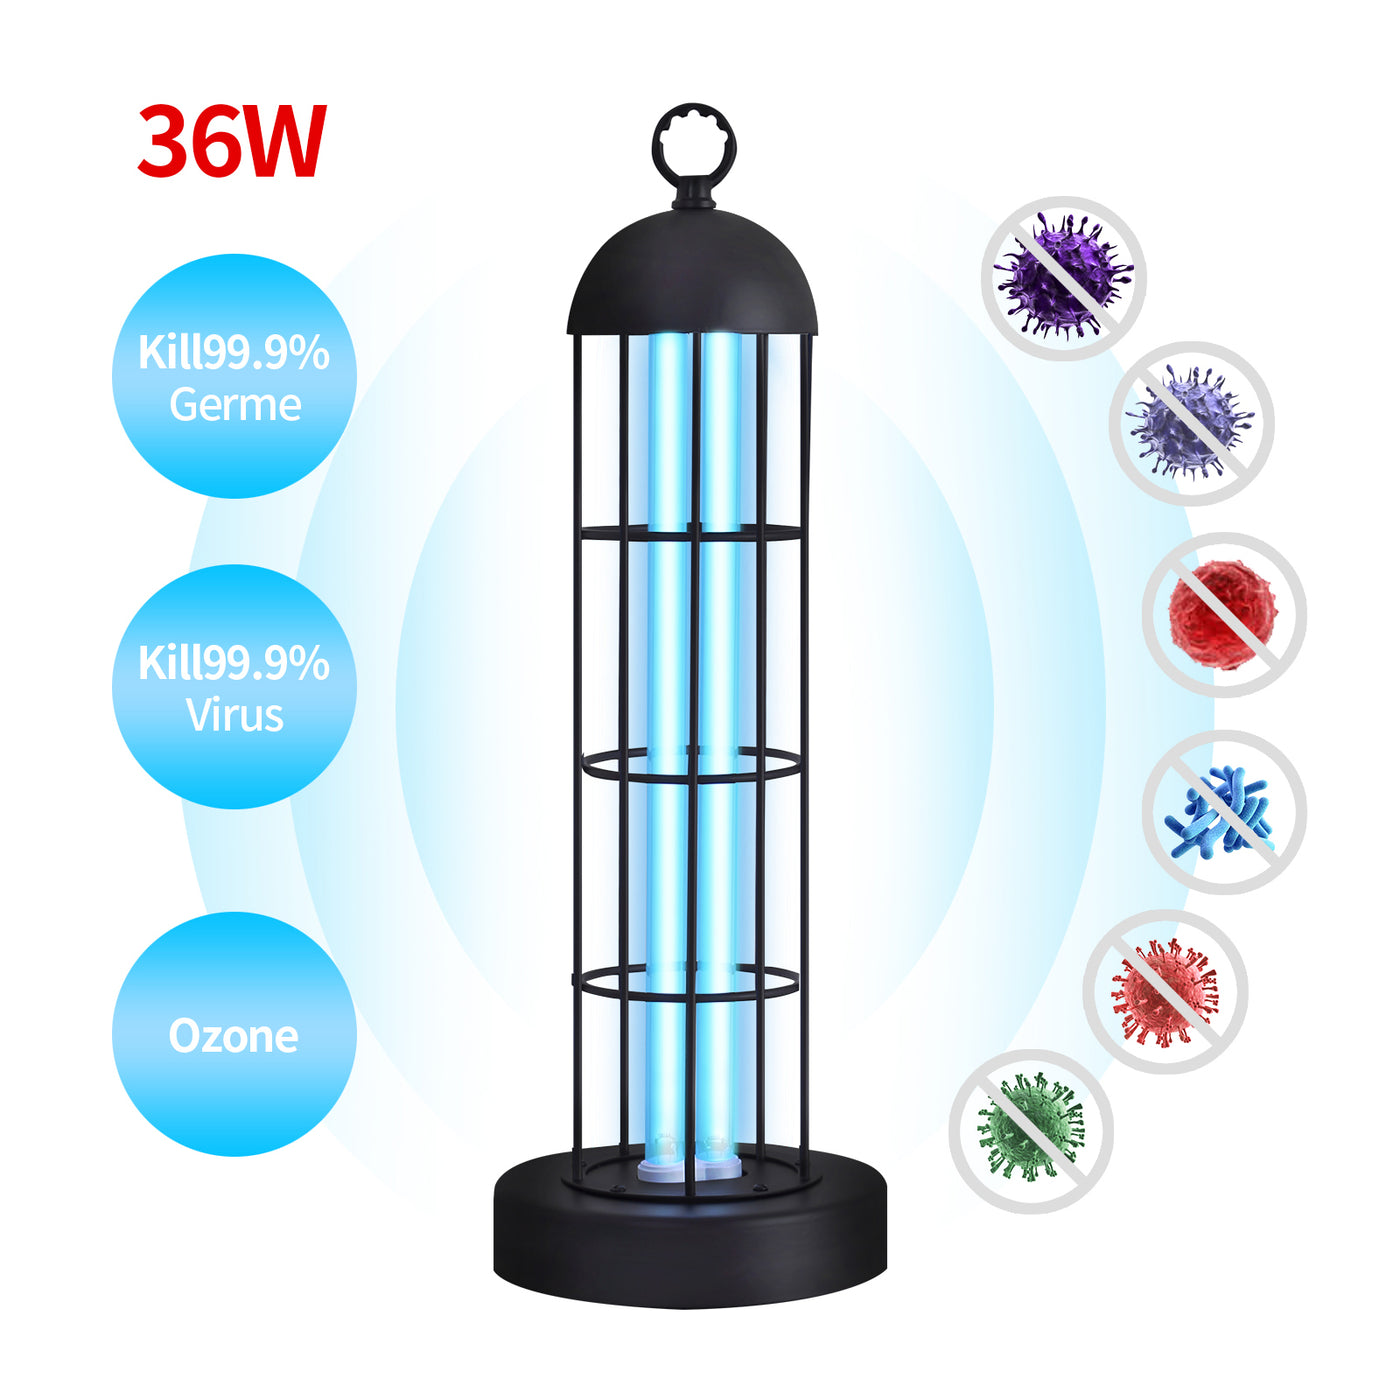 UV Germicidaltable Lamp, Ultraviolet Light Lamp with Remote Control for Home